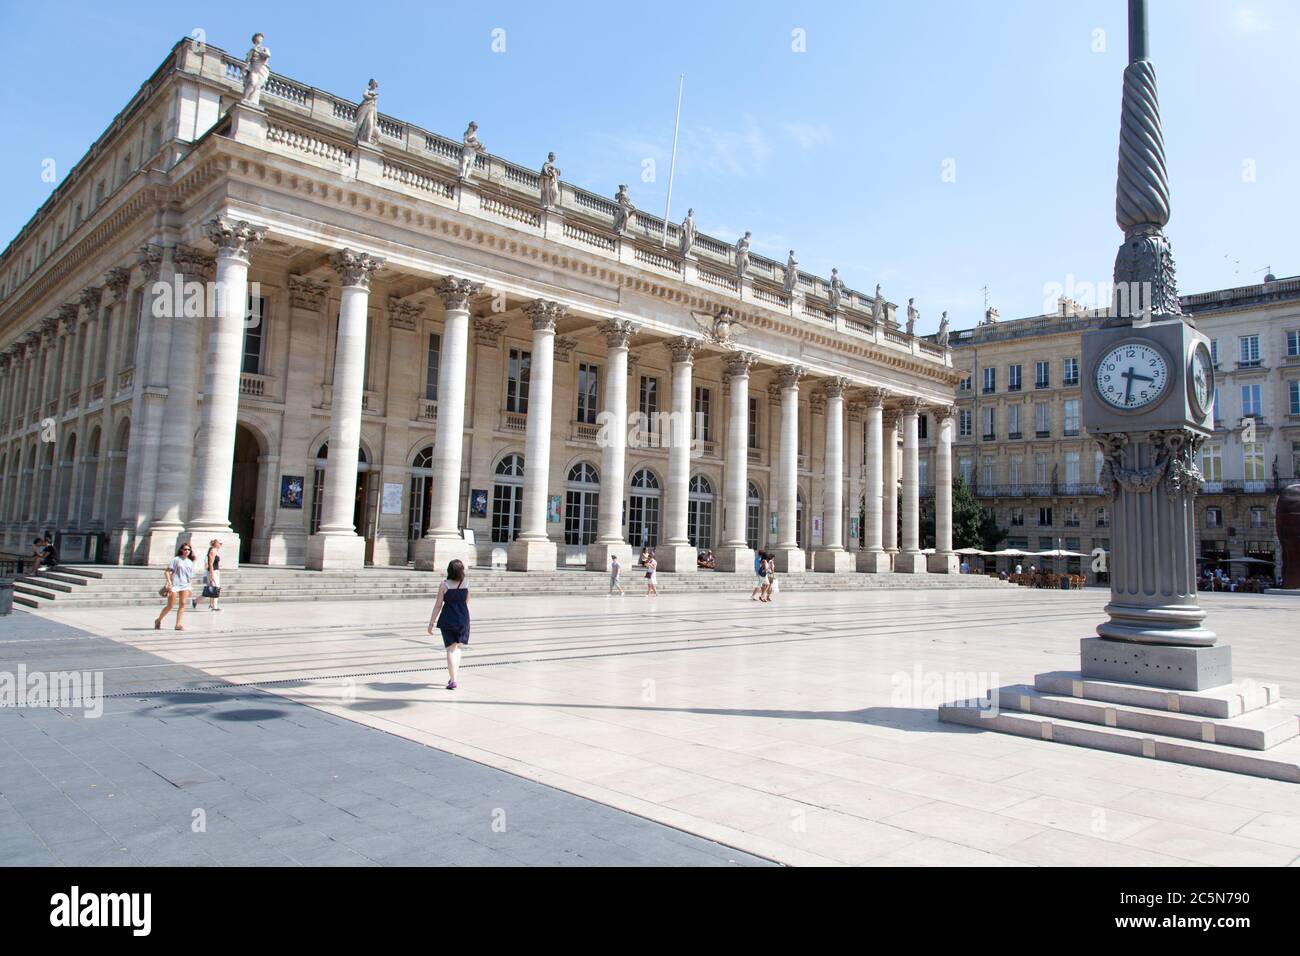 Bordeaux , Aquitaine / France - 10 30 2019 : Facade of the opera grand theatre of Bordeaux with clock city center, France Stock Photo